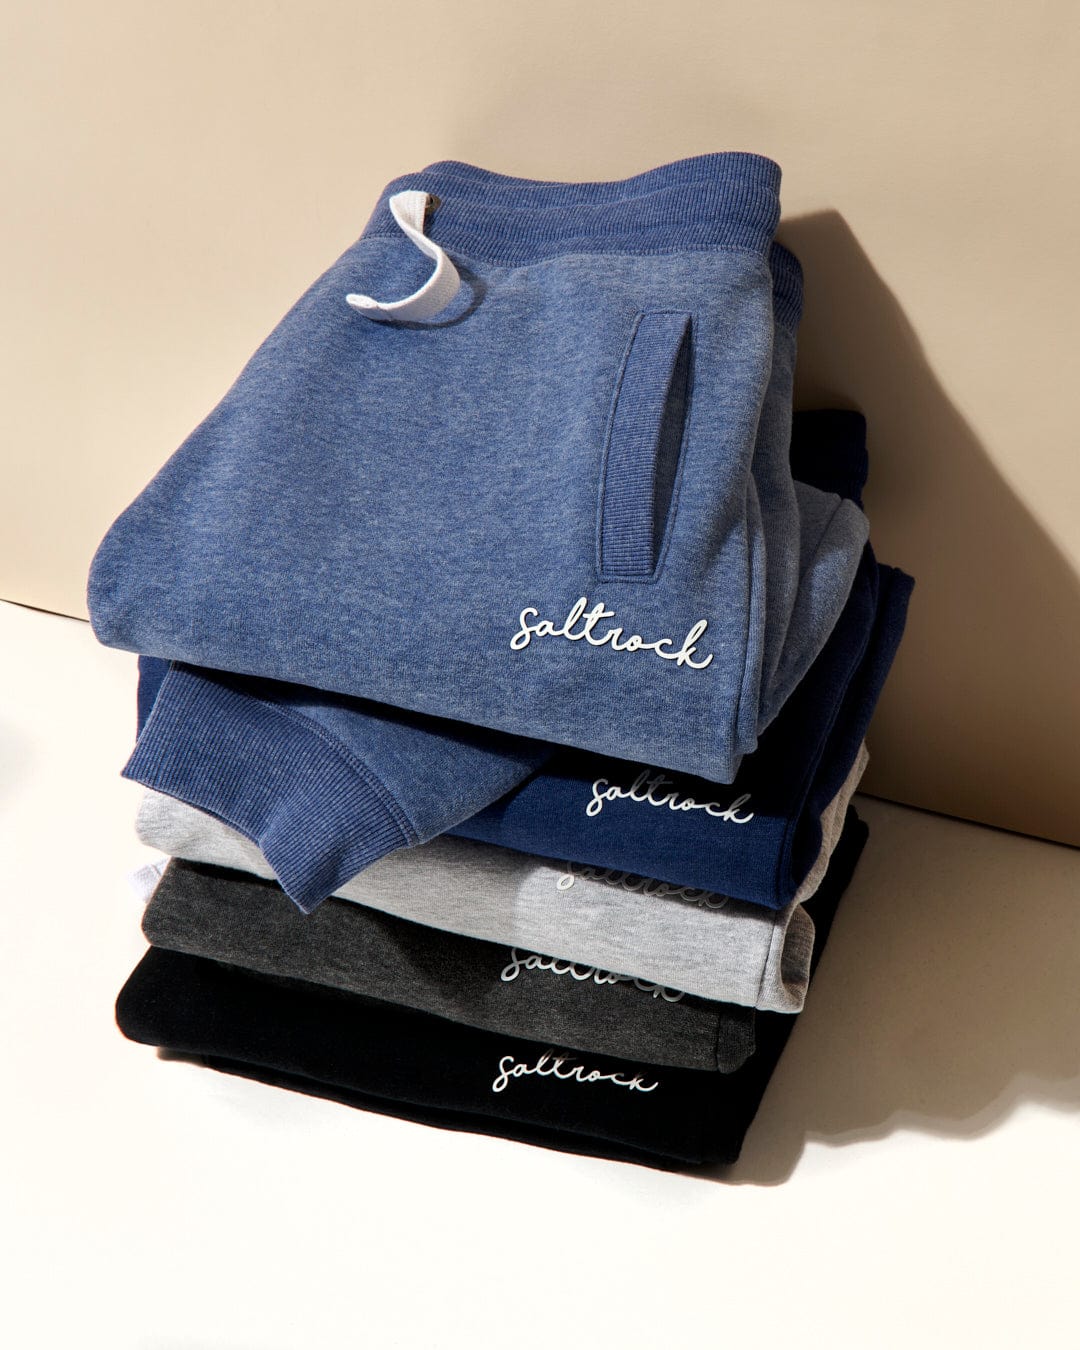 A stack of folded Velator Womens Joggers in Dark Grey with the Saltrock branding visible on the top one.